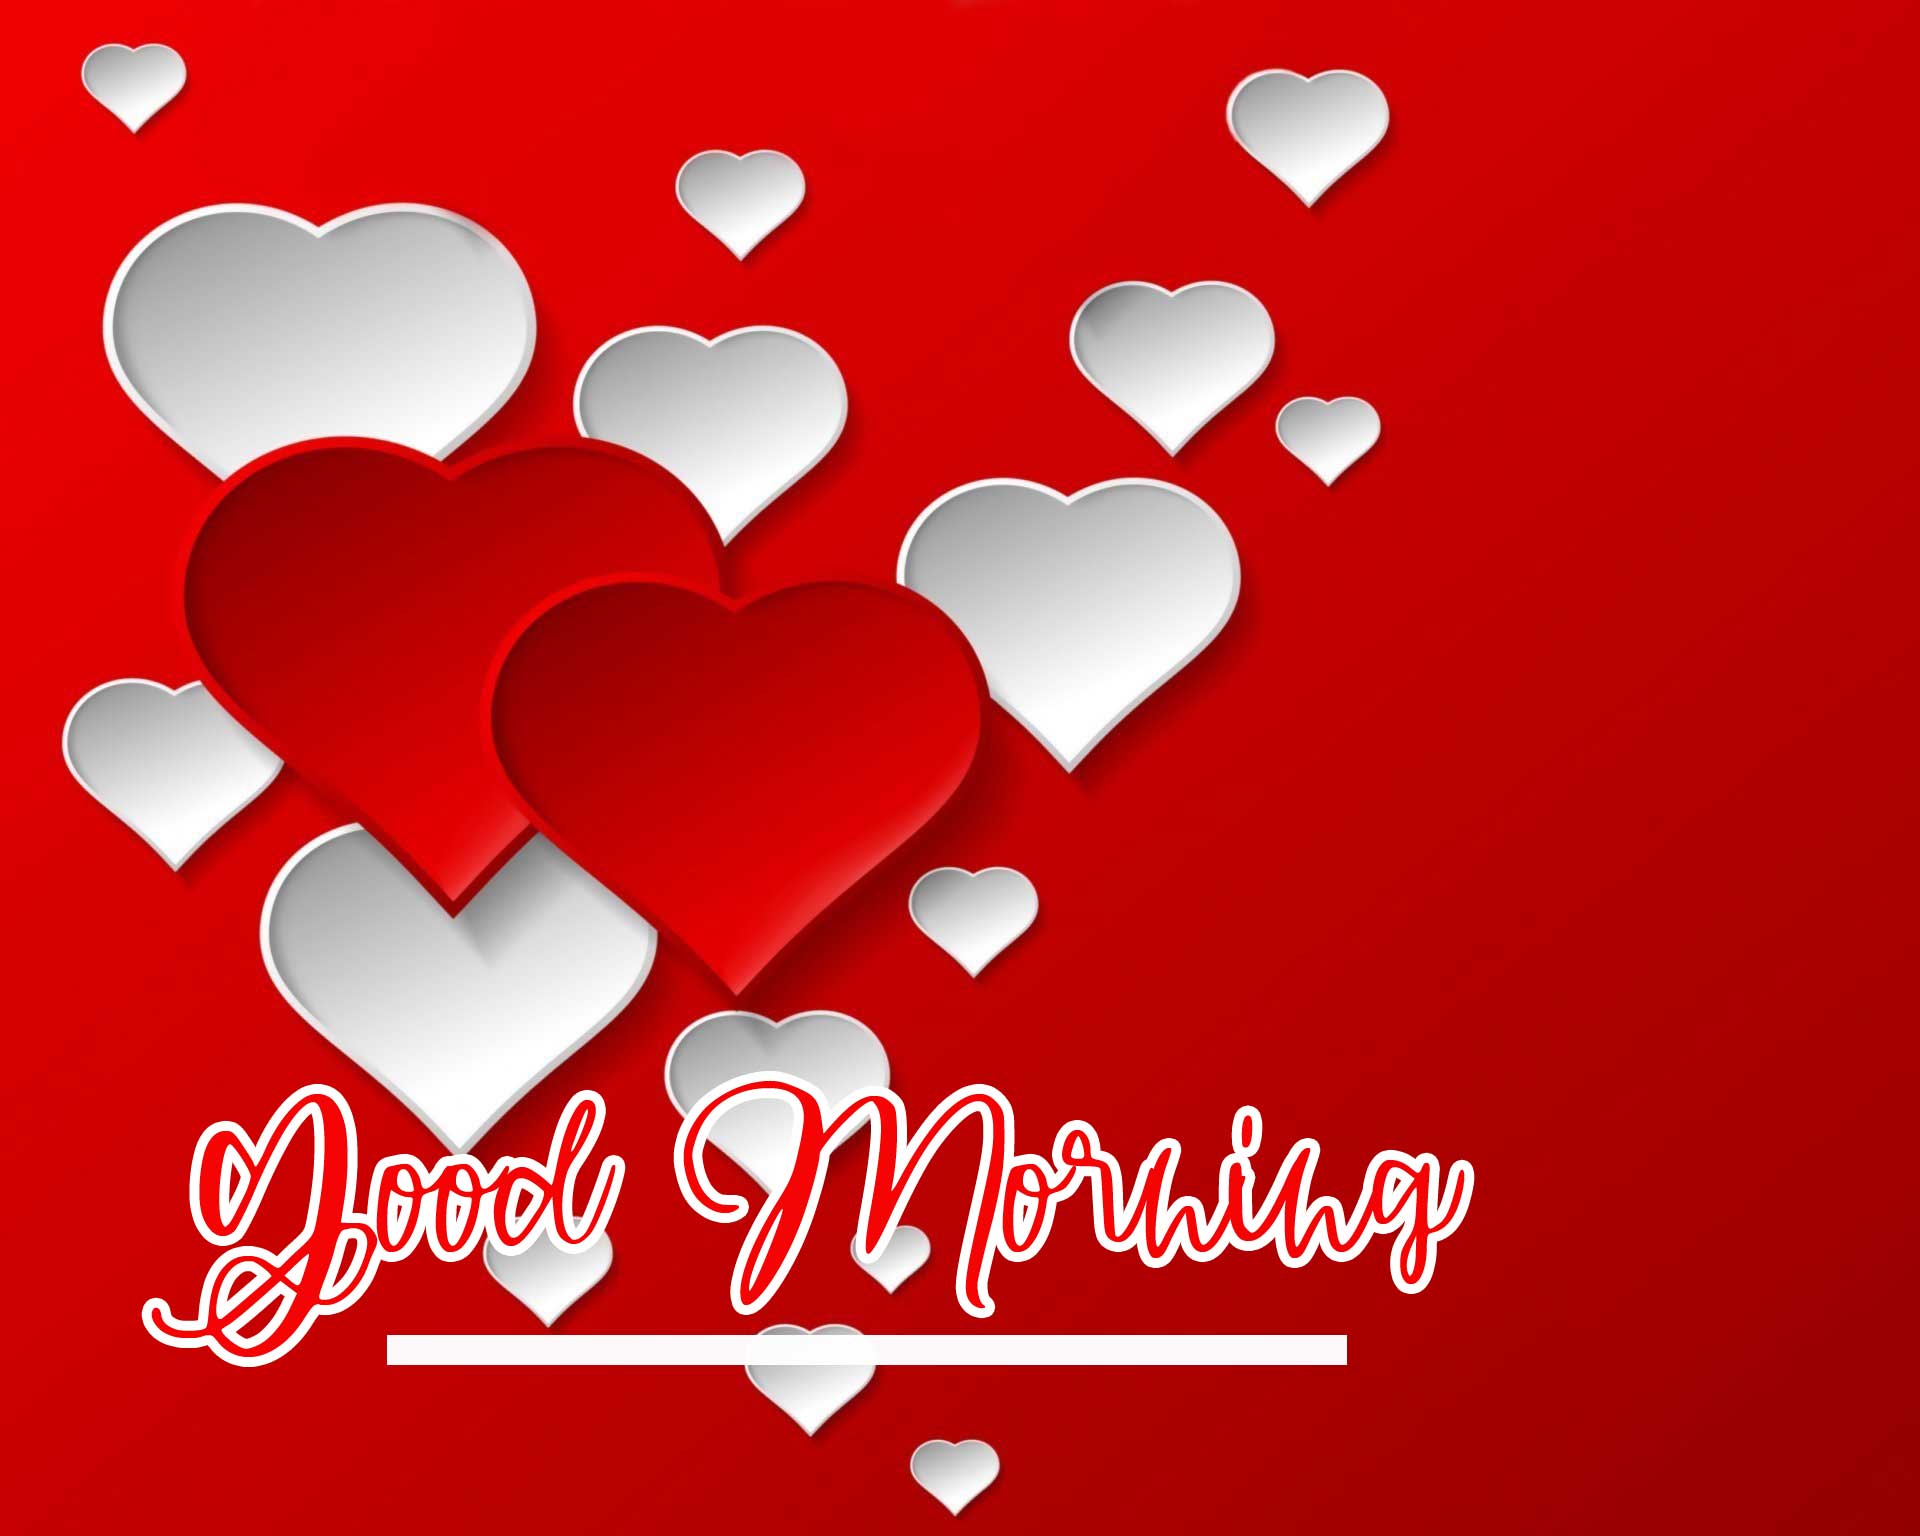 Dil Good Morning Images Wallpaper Free Download 